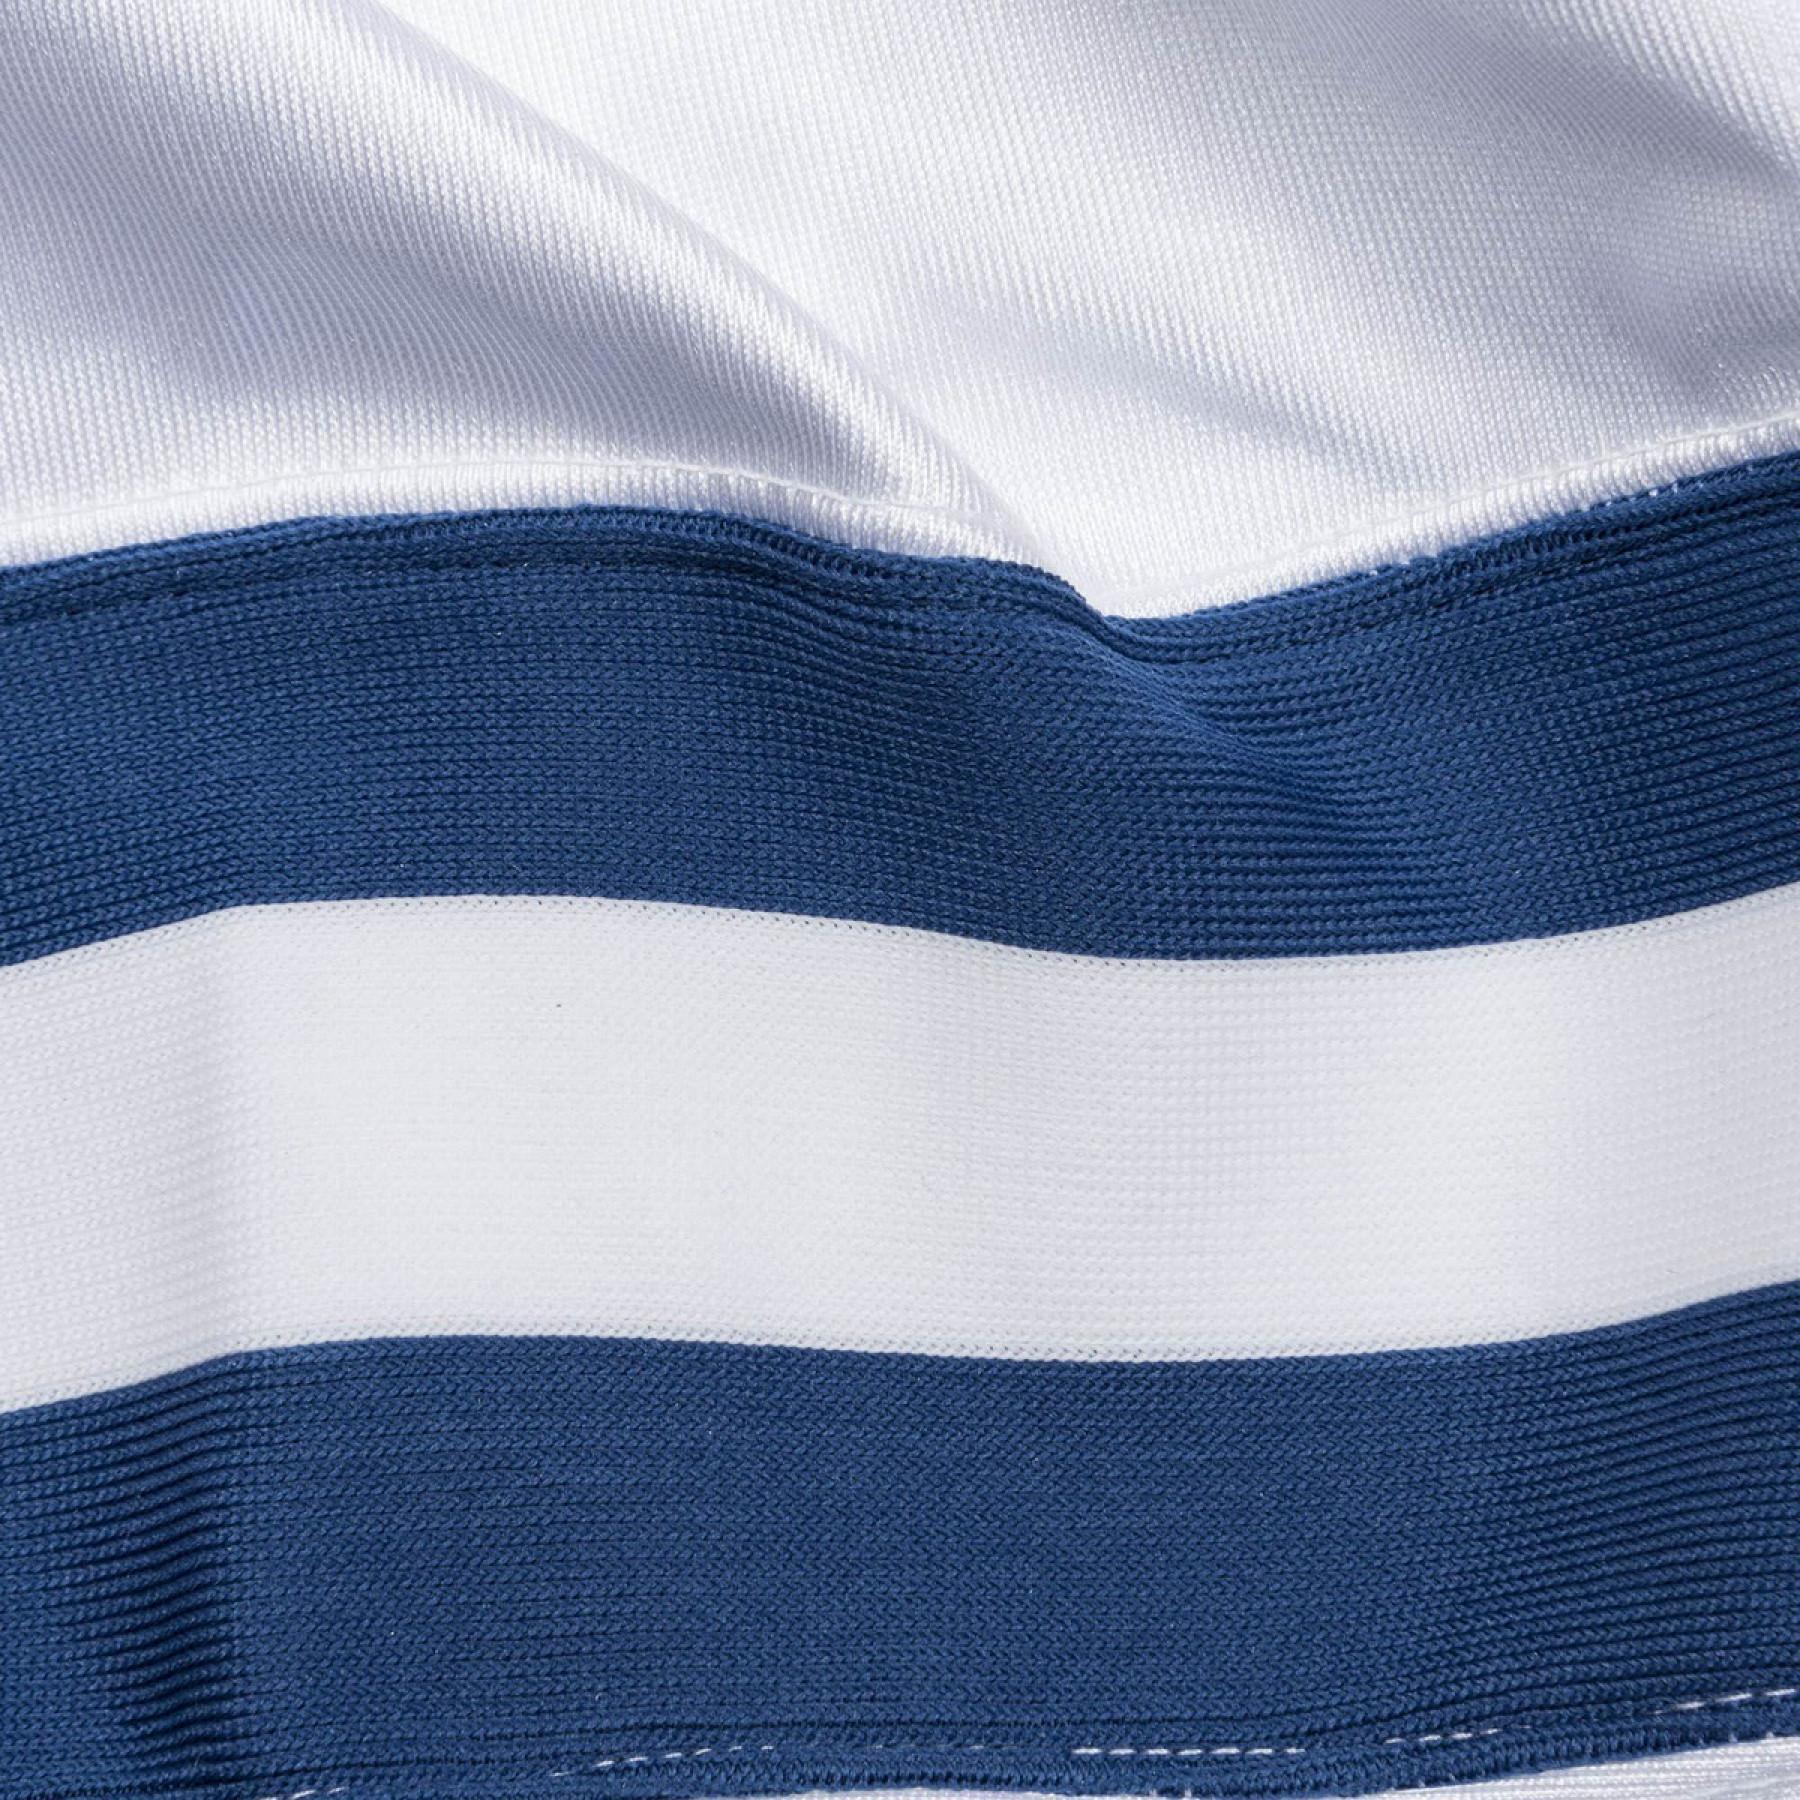 Maillot authentique Indianapolis Colts Peyton Manning